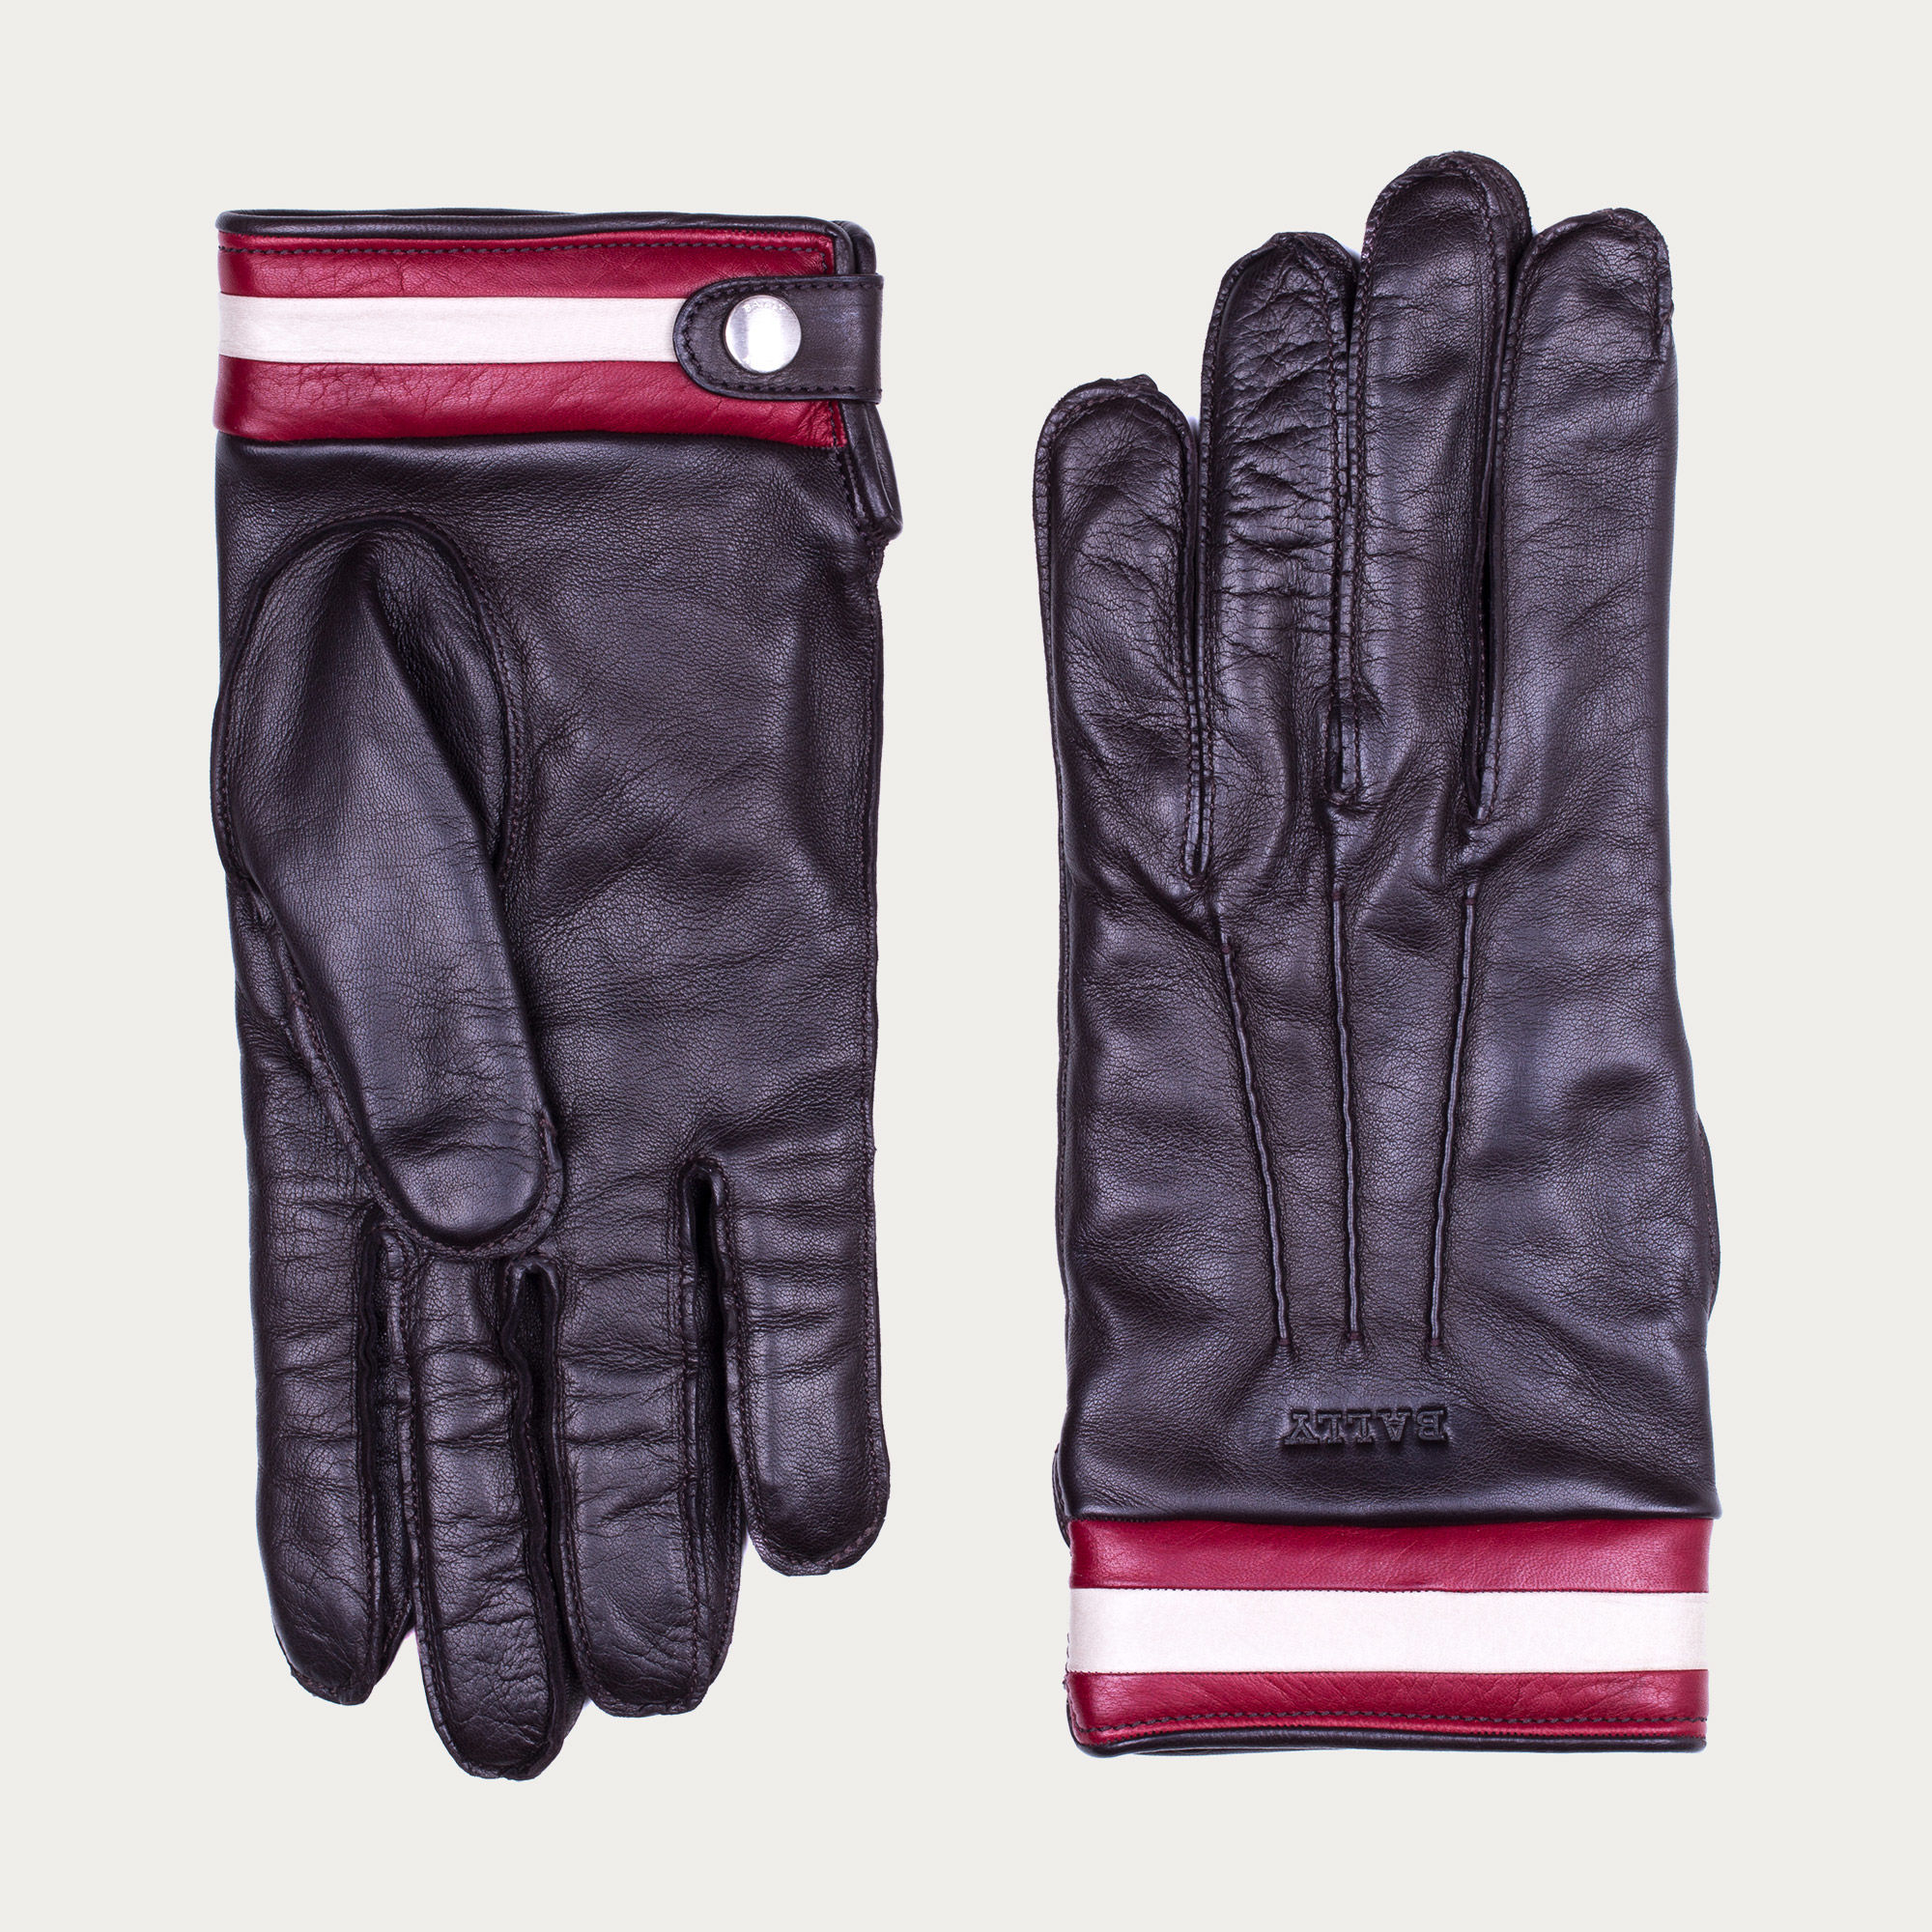 Lyst - Bally Nappa Leather Gloves Men's Leather Gloves In Brown in ...